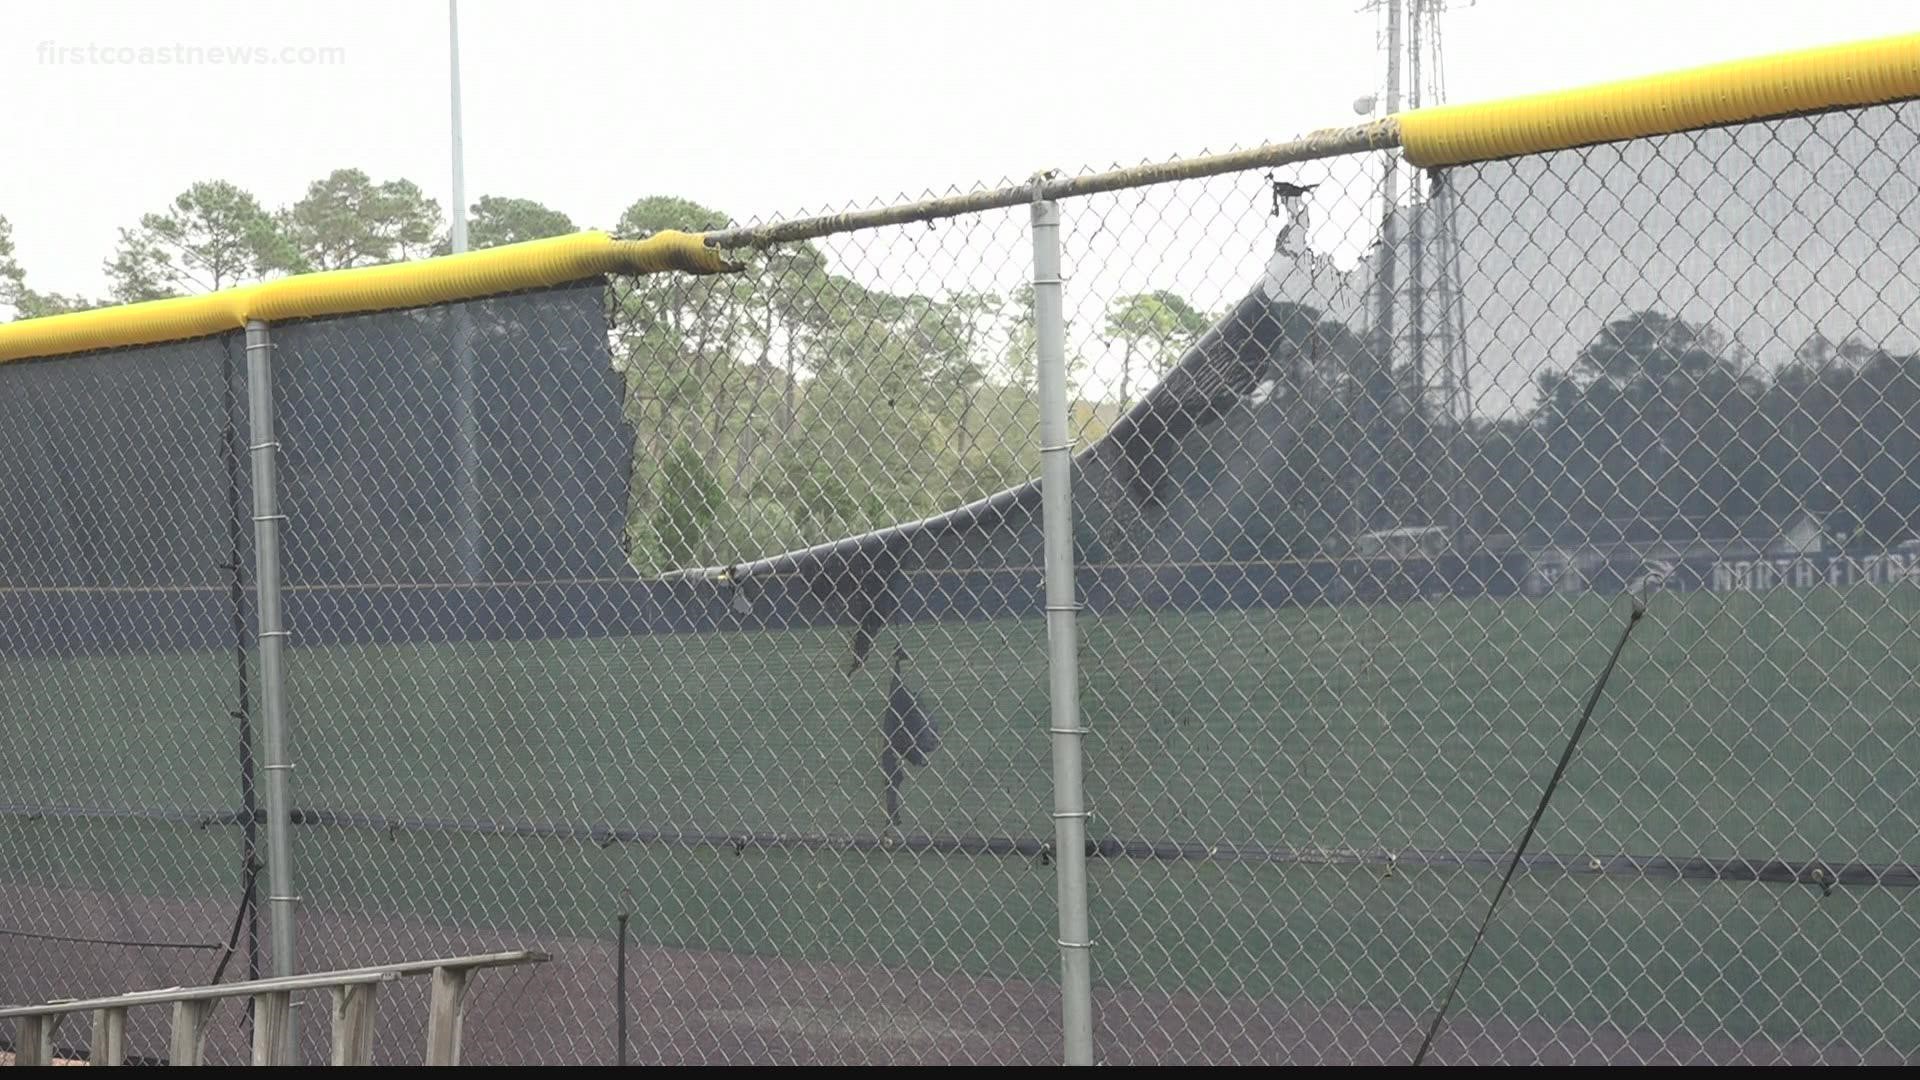 When officers arrived on scene they found a portion of the left-field wall, netting and a ladder in the area on fire.